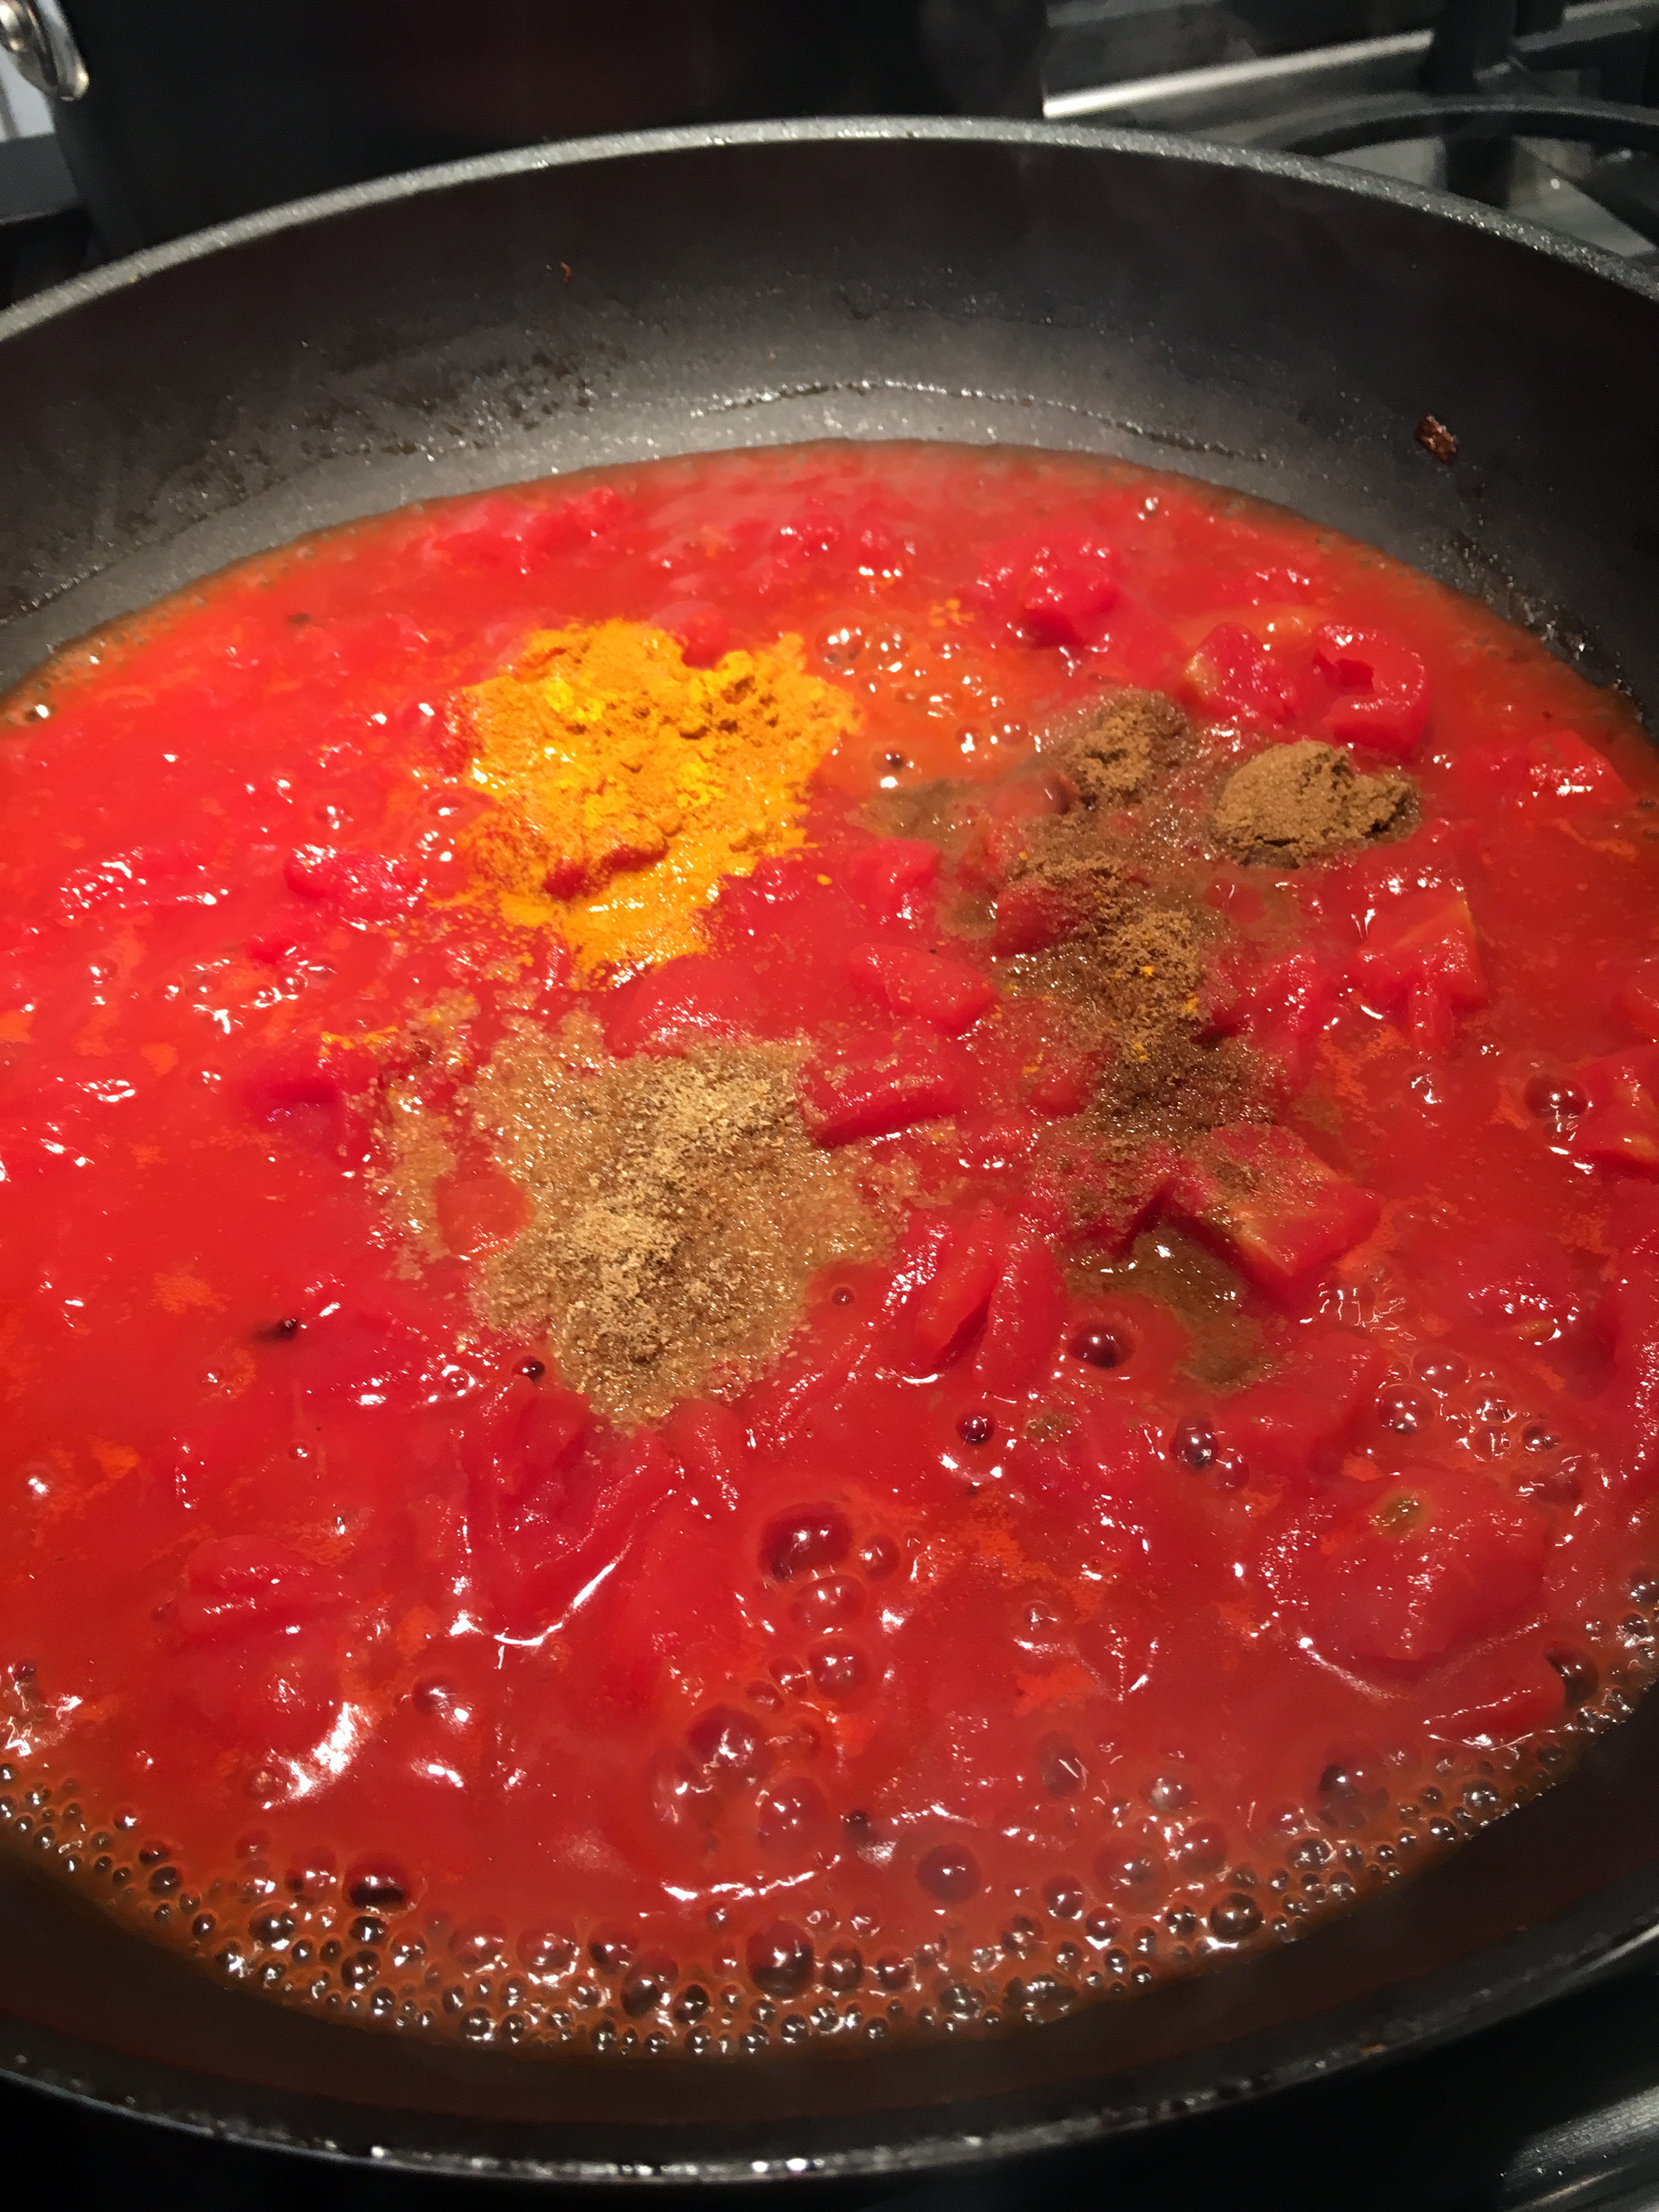 In the frying pan over medium heat, add the diced tomatoes. Cook until bubbling and warmed through, then add the cumin, coriander, turmeric, and the cayenne if using. Stir well, then let simmer for about 3 minutes until thickened. 